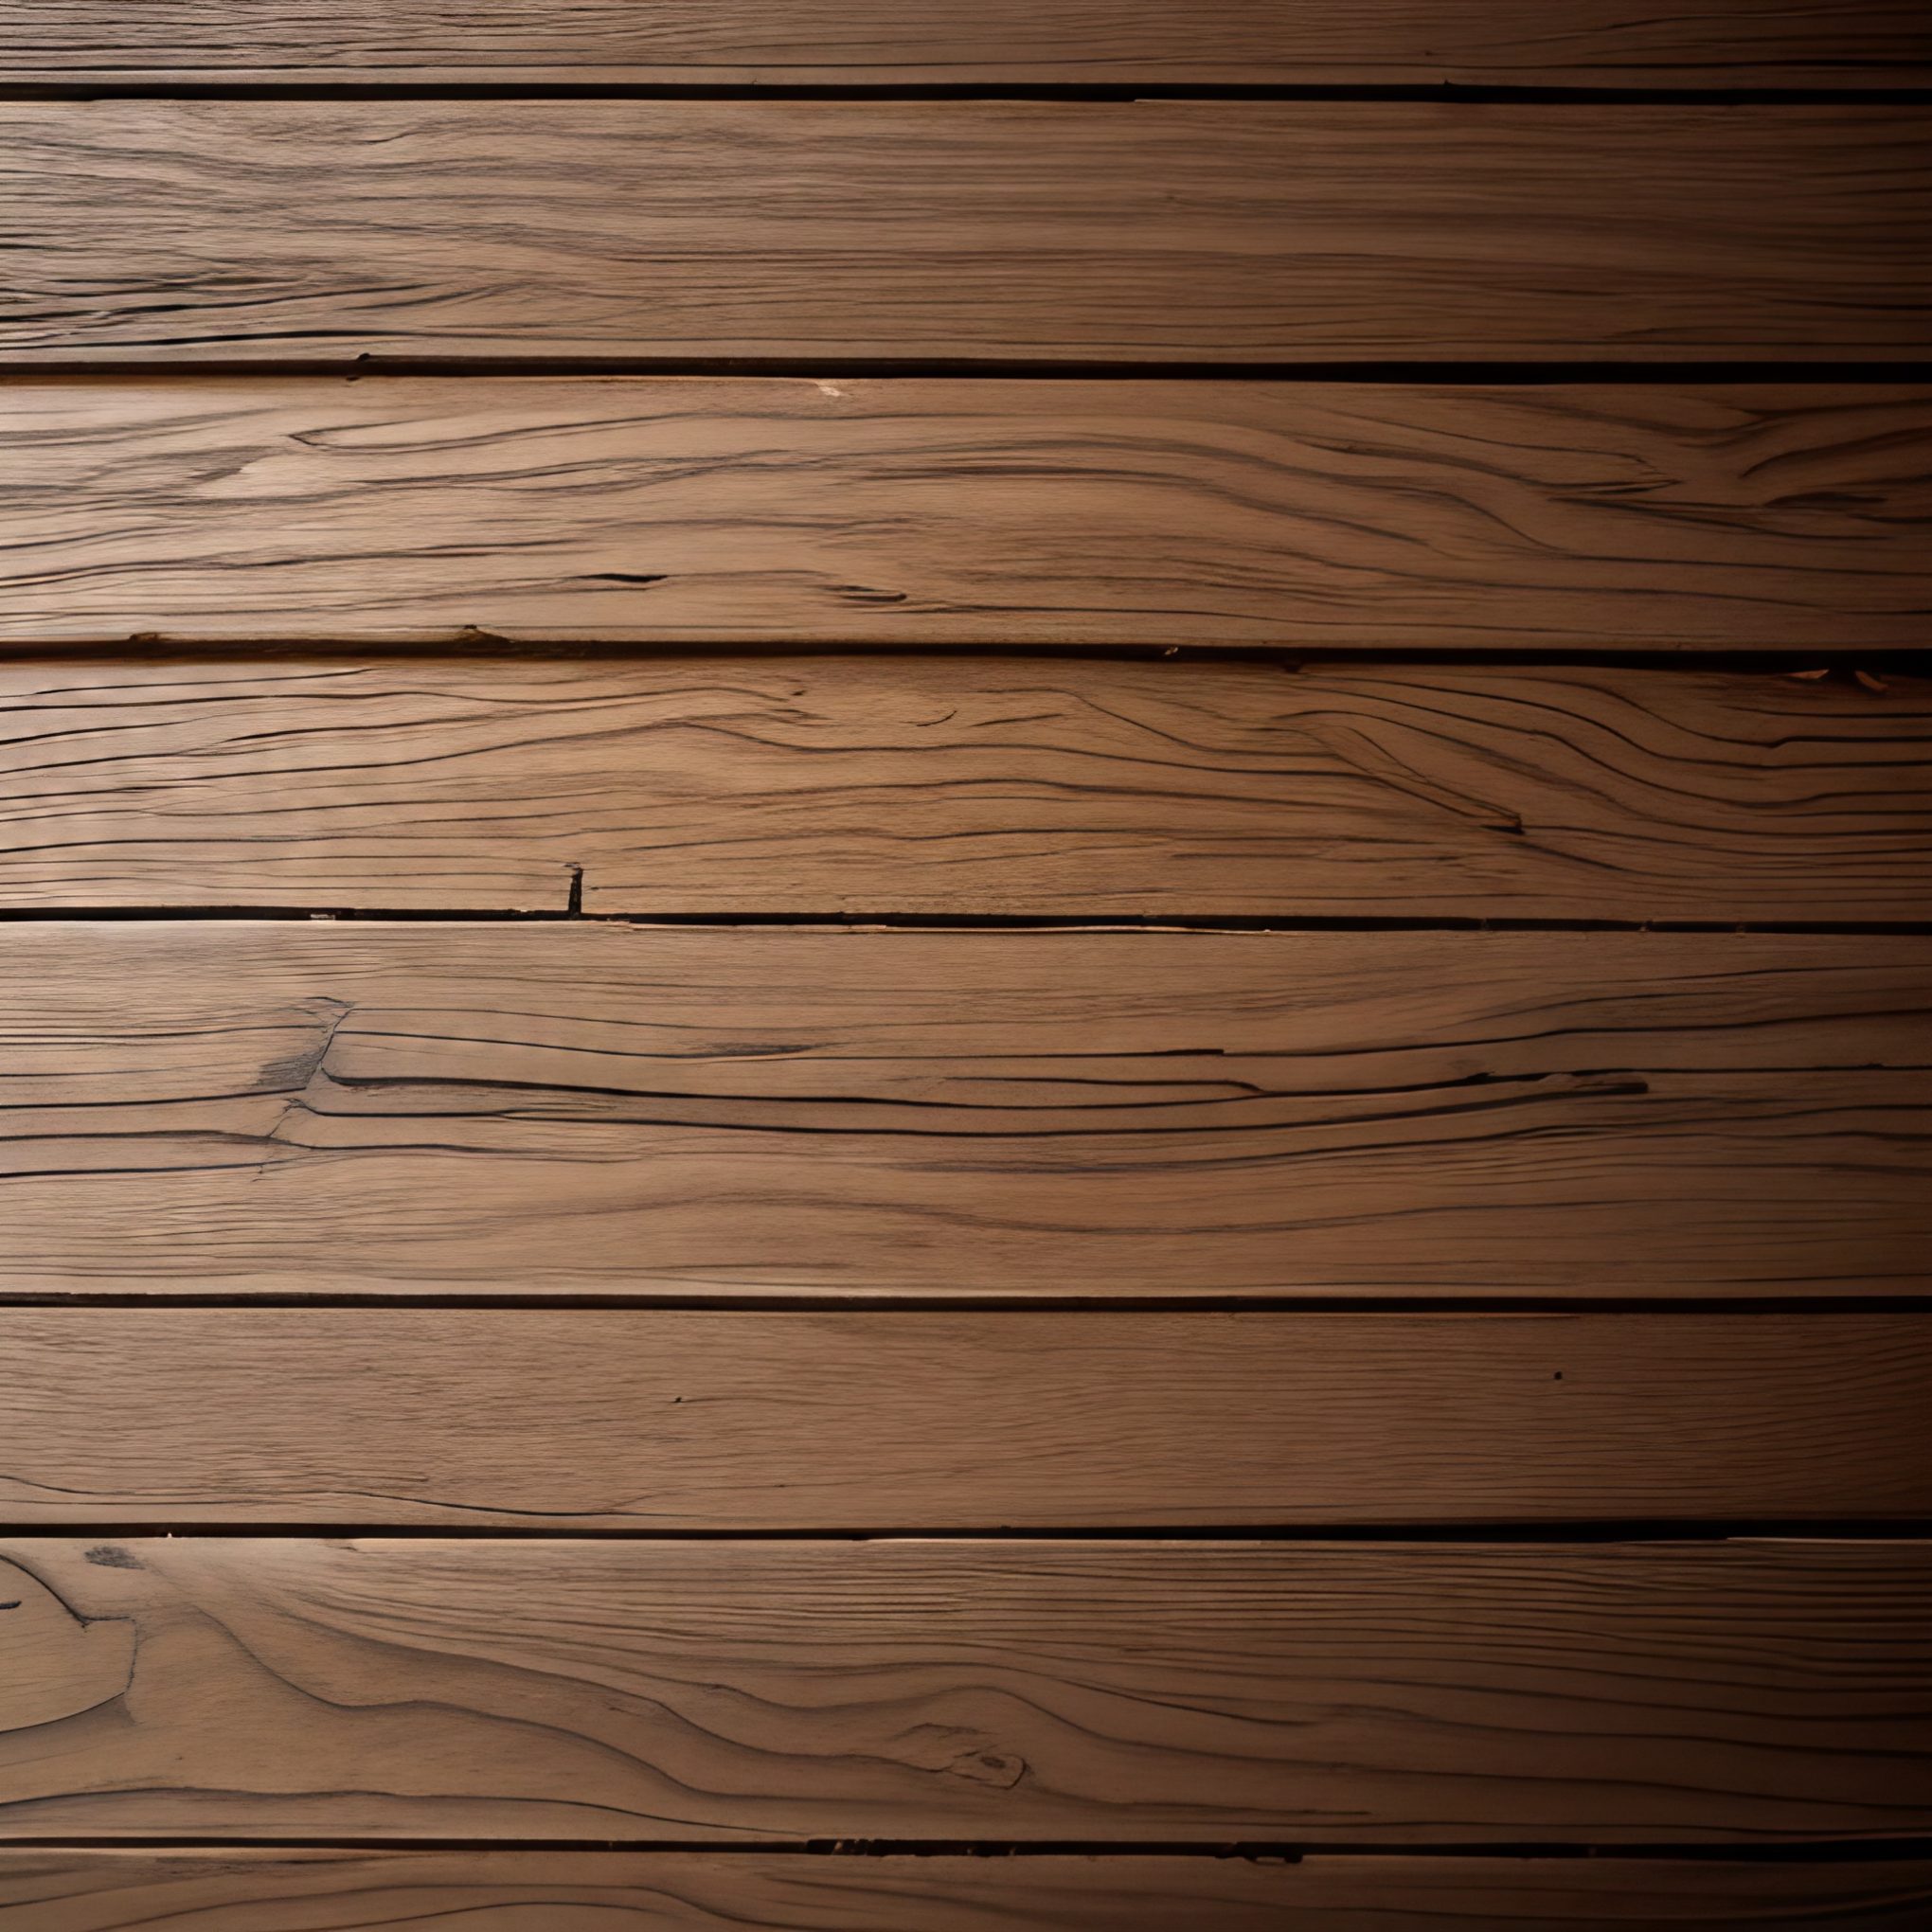 Free Stock Image Wooden Planks Background